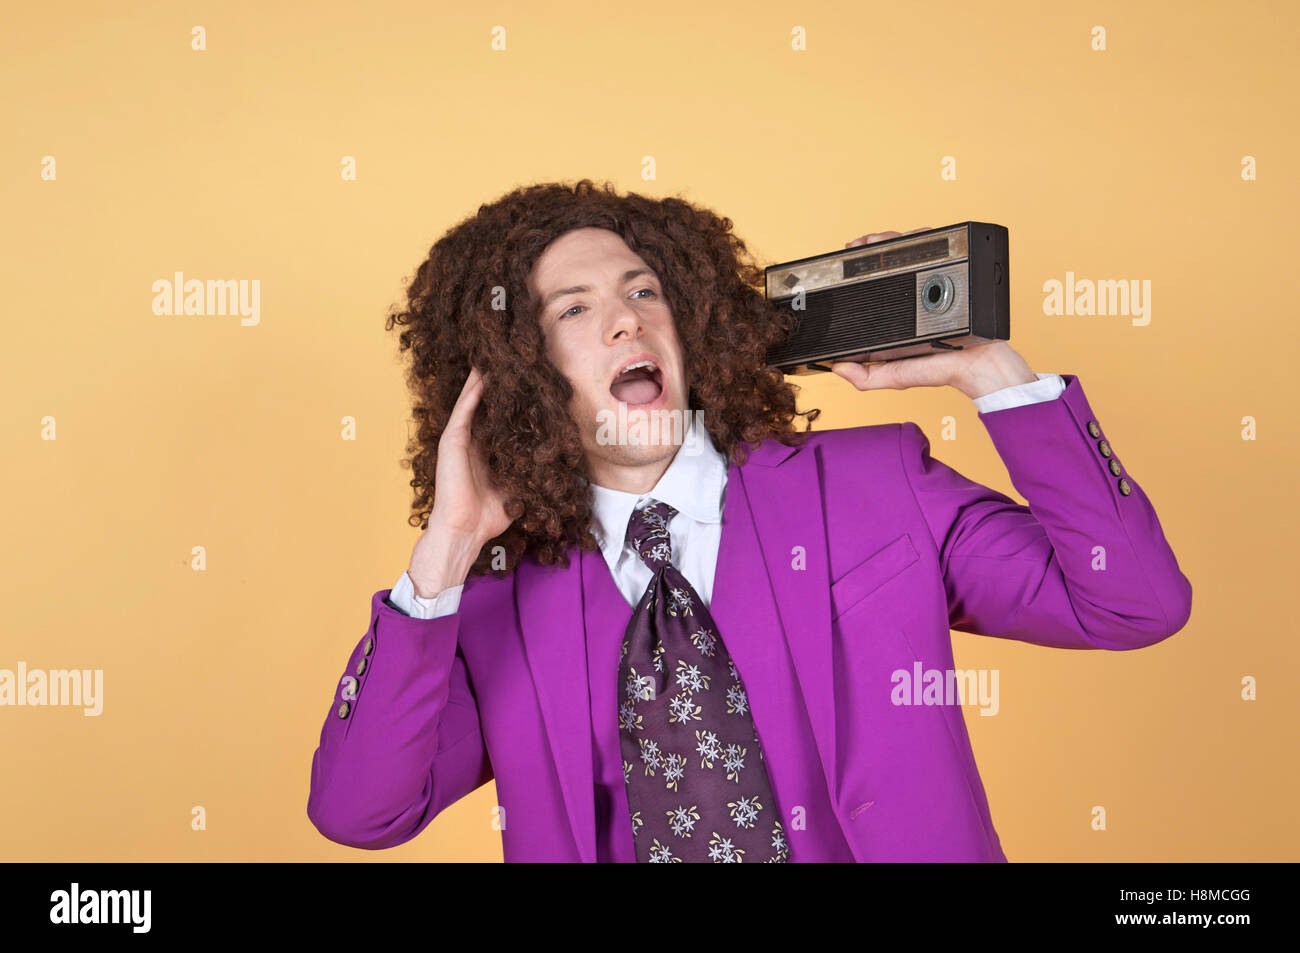 Caucasian man with afro wearing Purple Suit listening to music Stock Photo